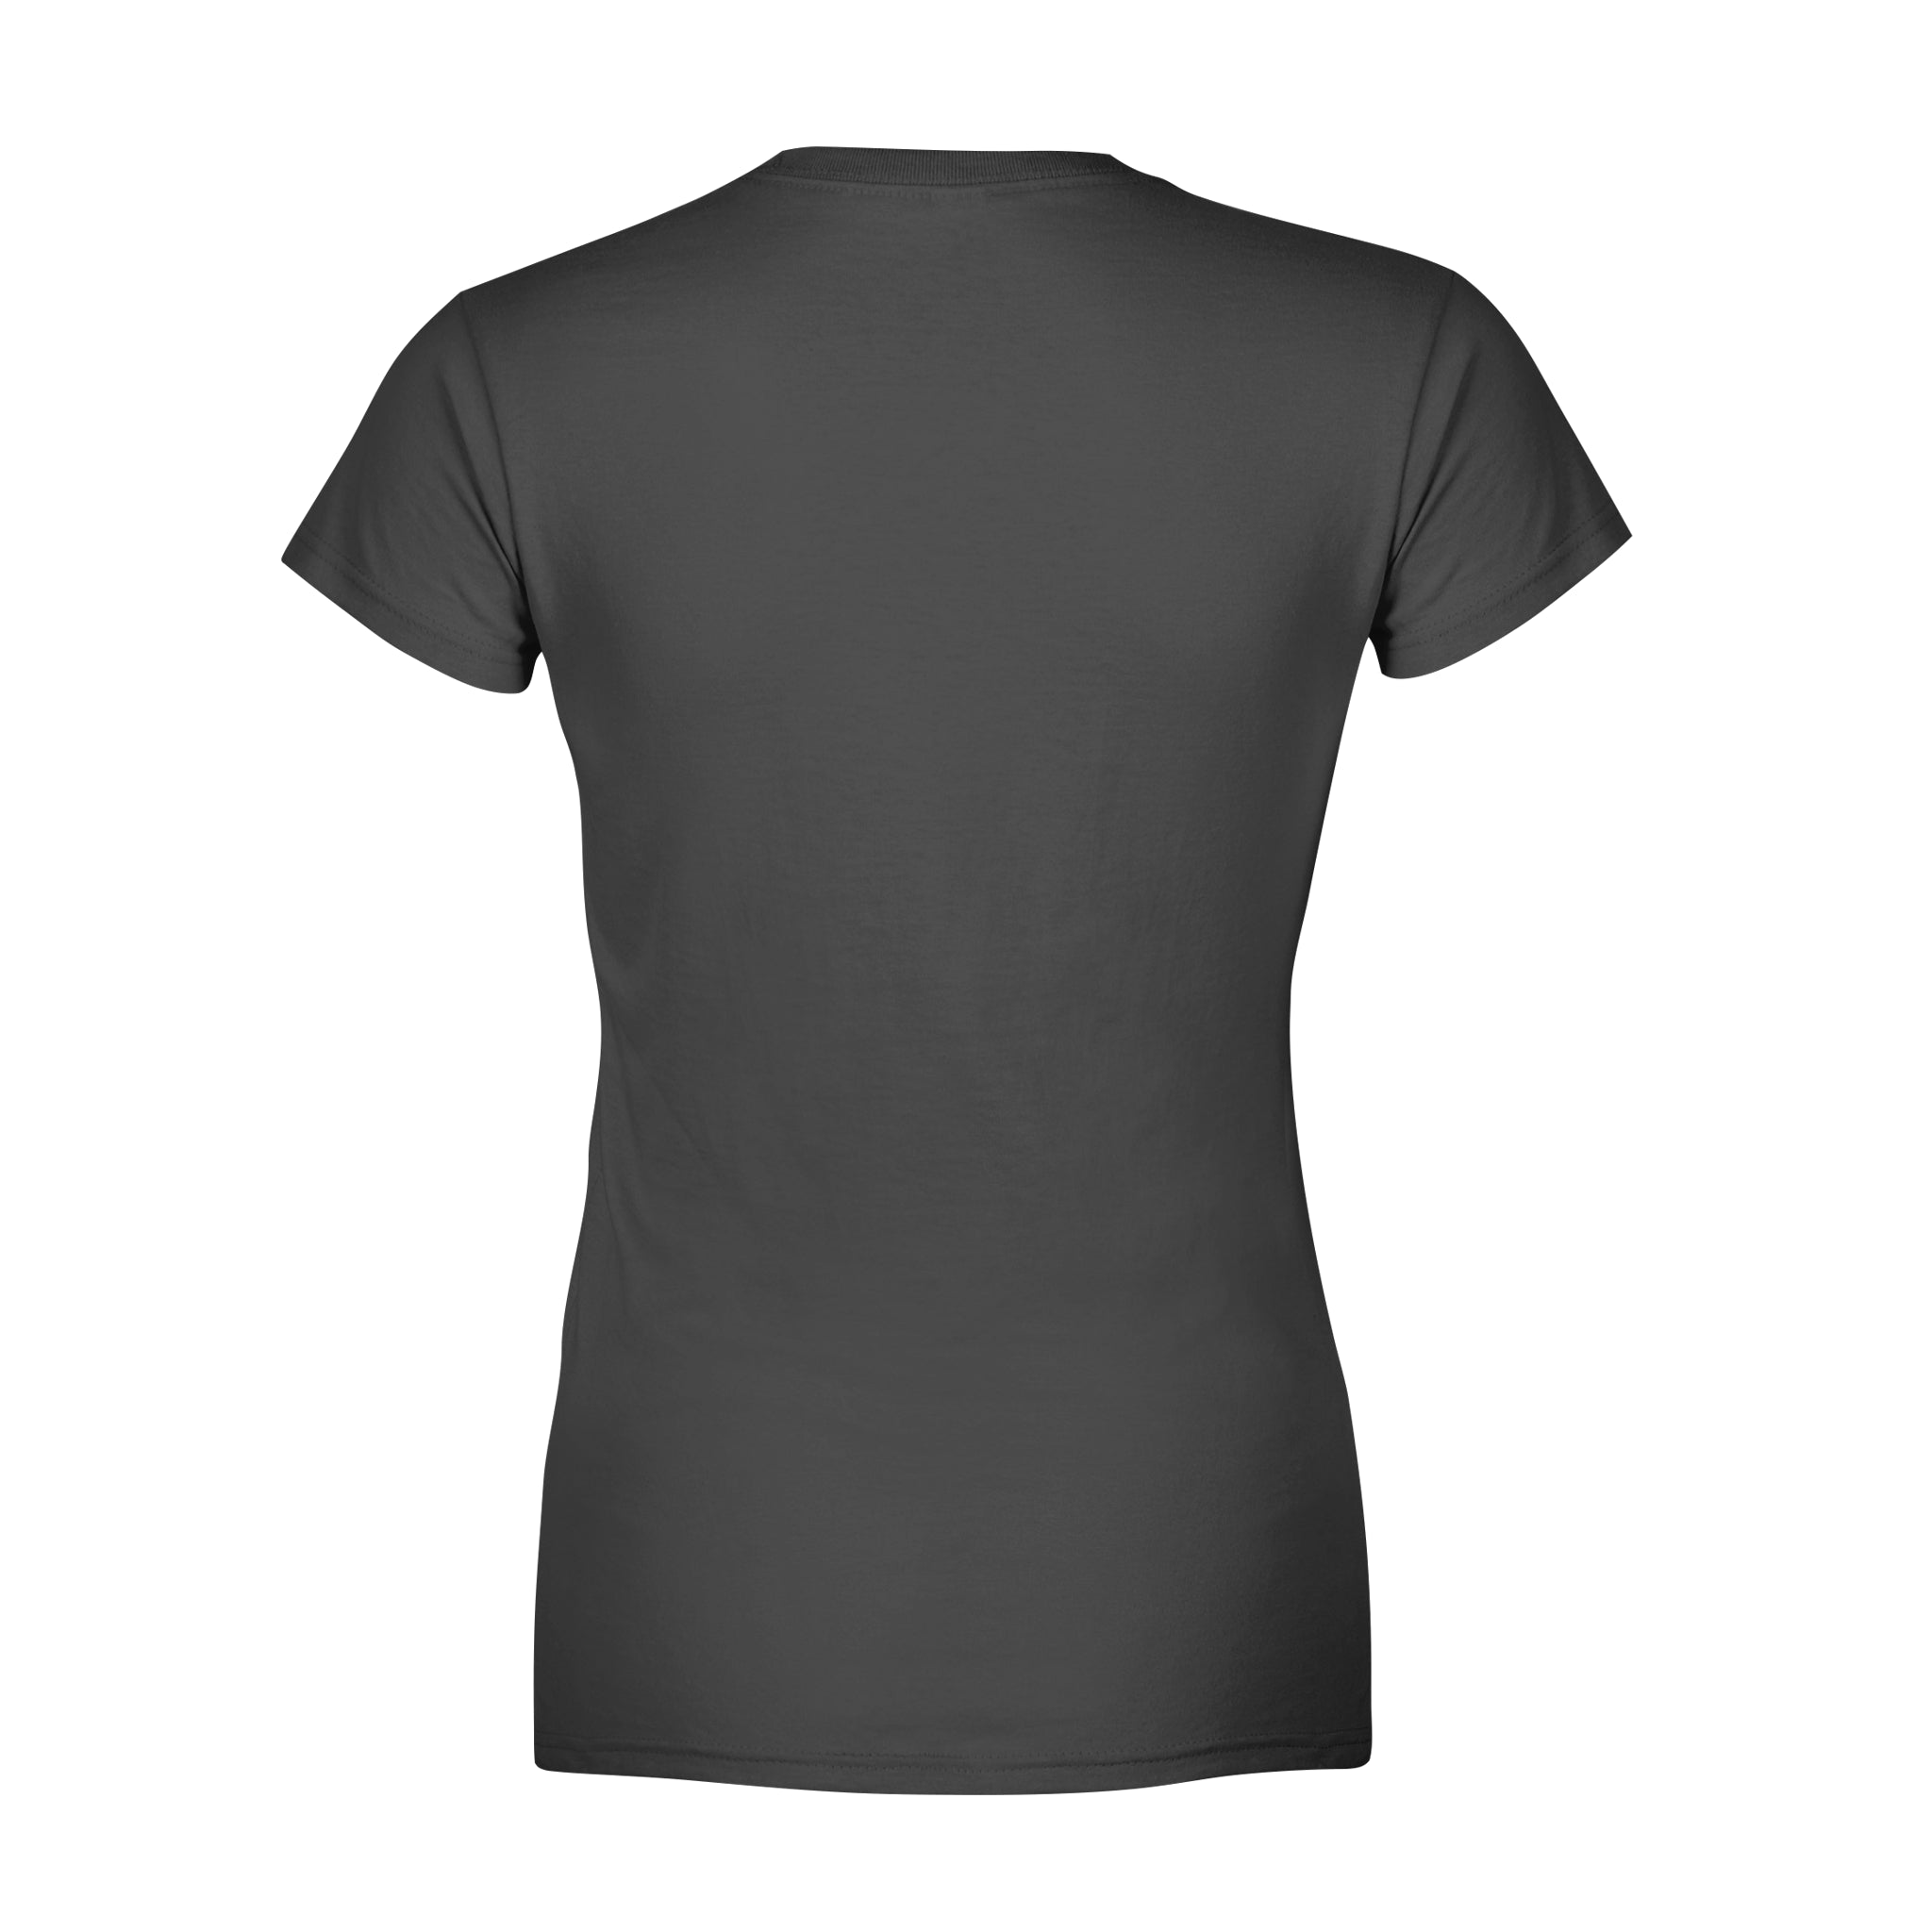 Out Law -  Women's T-shirt